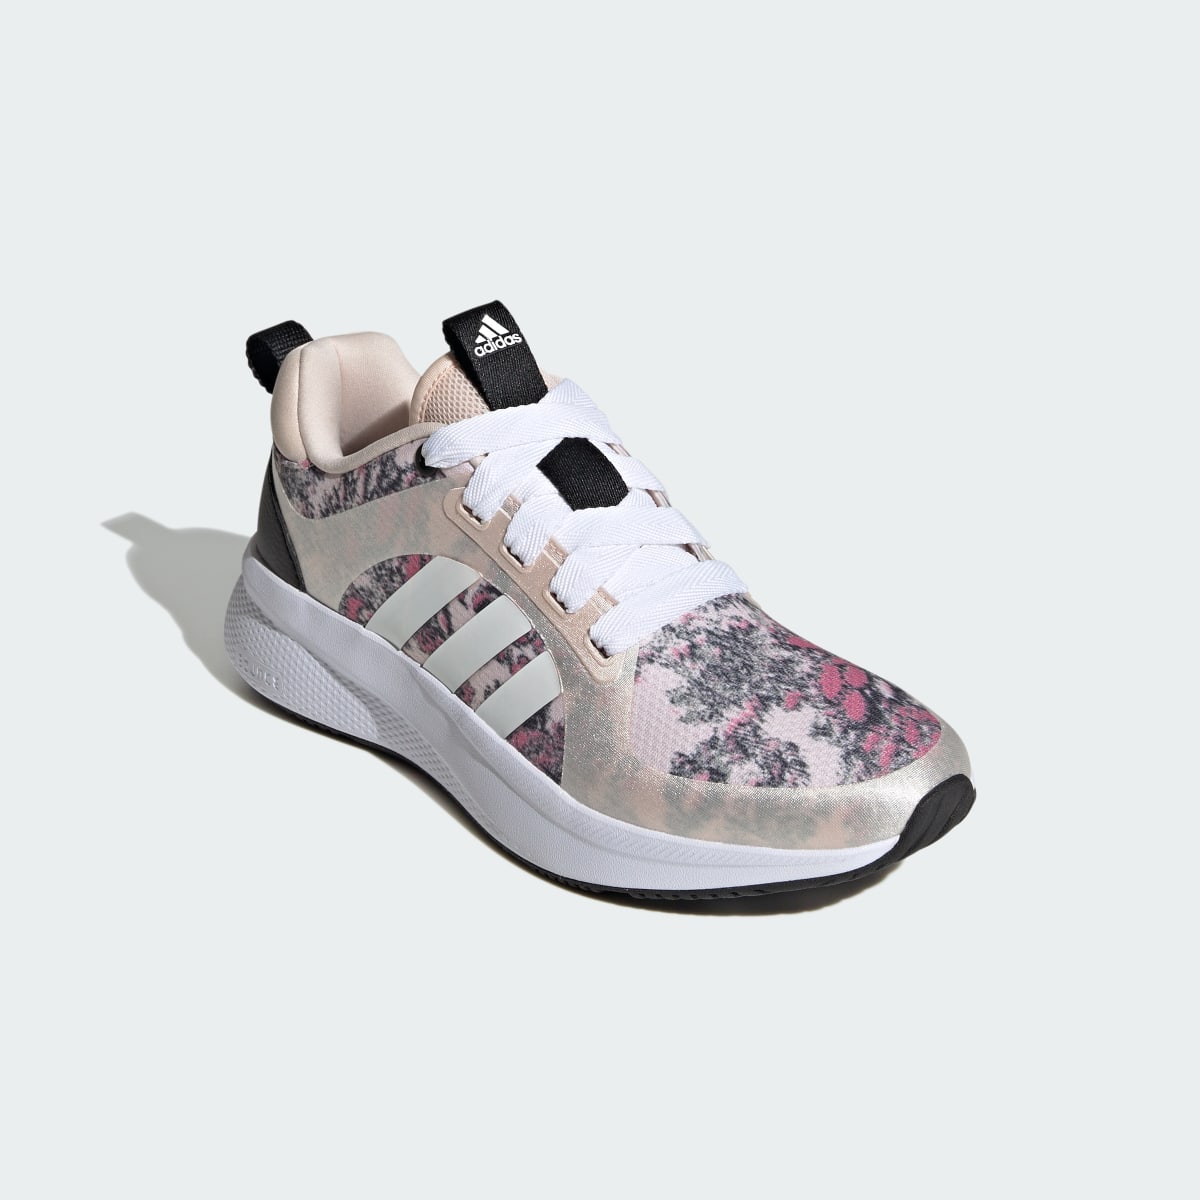 Adidas Edge Lux 6.0 Shoes. 5